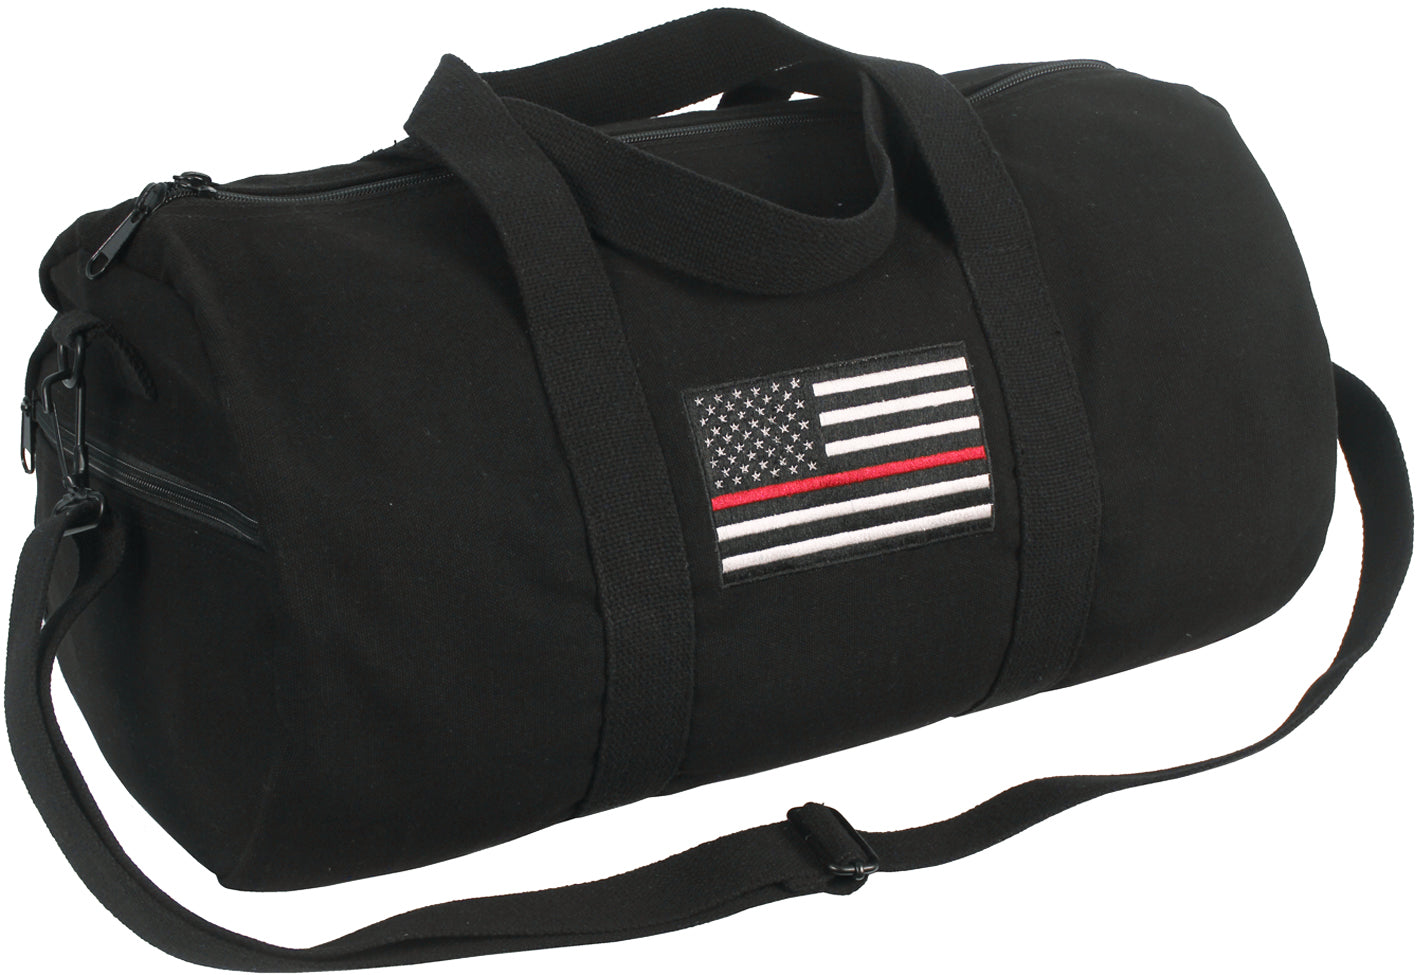 Black - Thin Red Line Canvas Shoulder Duffle Bag - 19 Inch